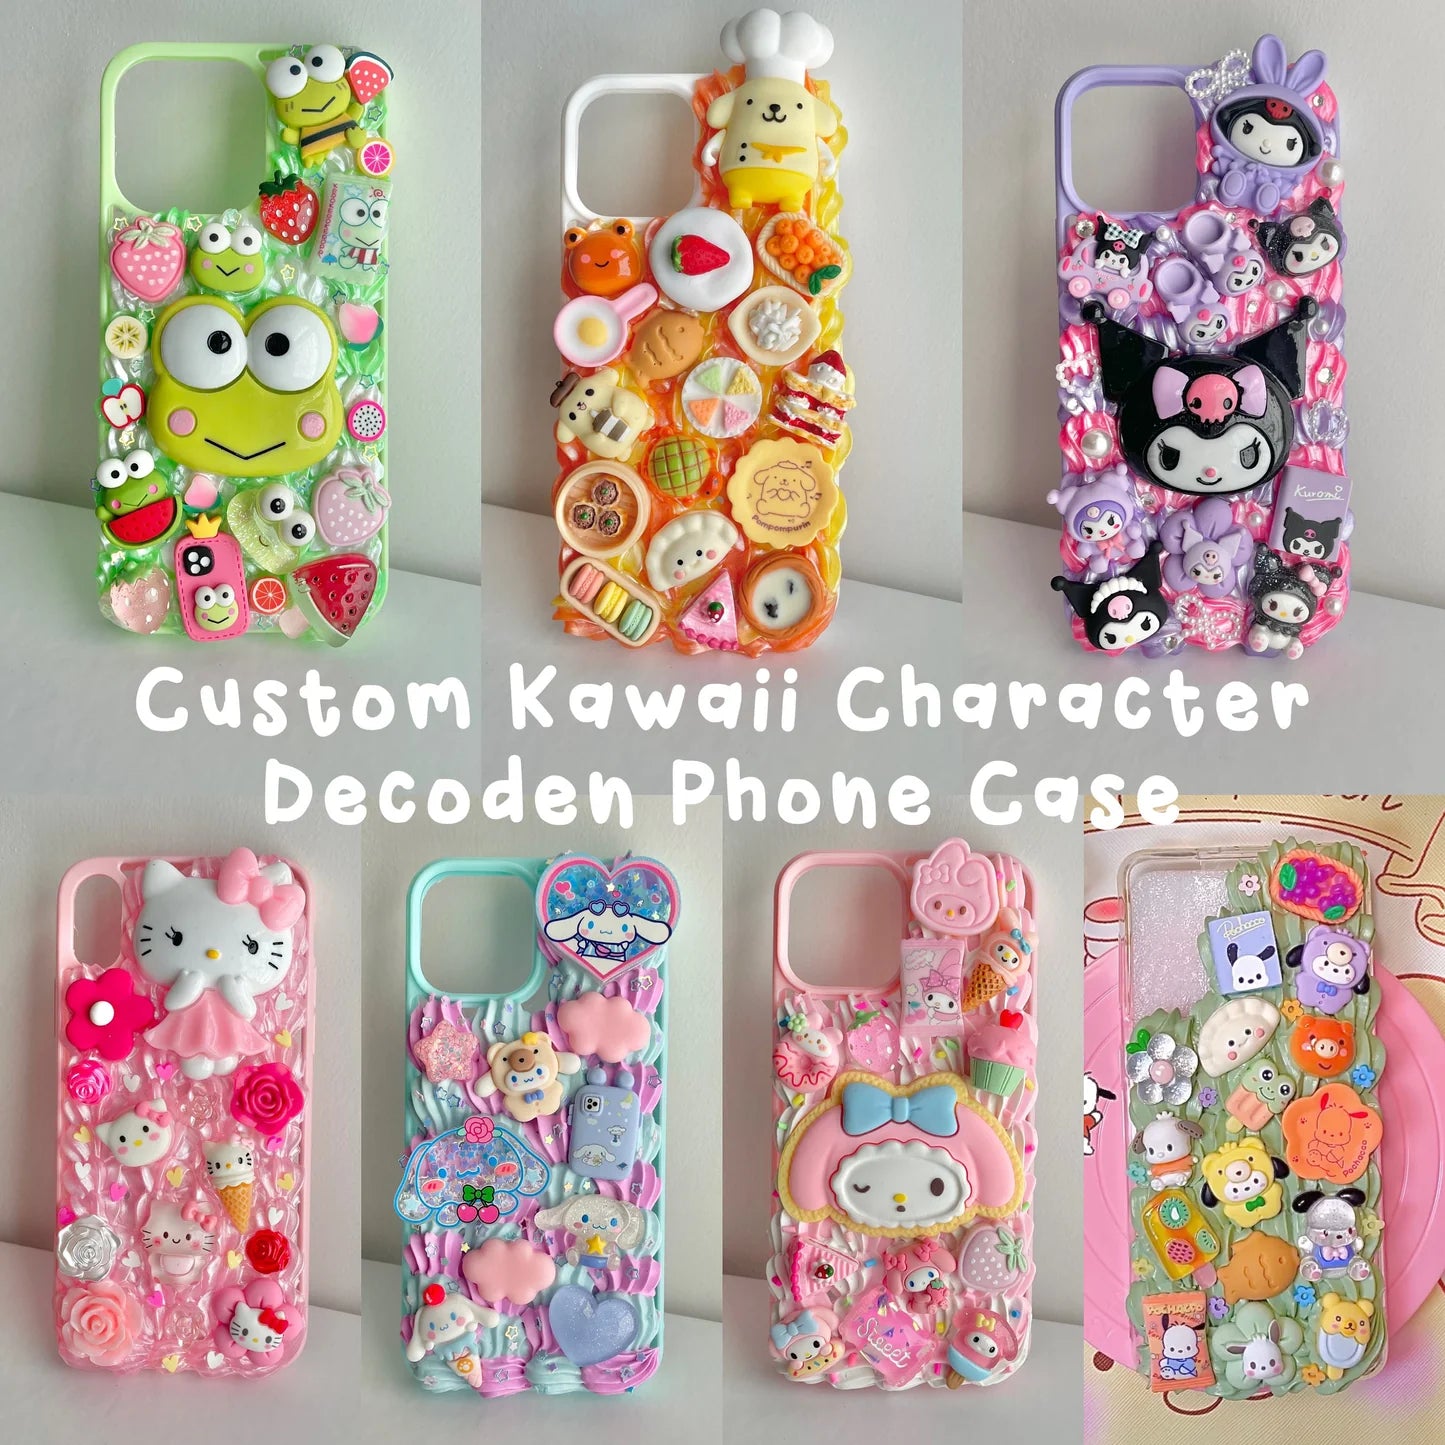 Decoden Desserts : Sweet Shoppe Decorations for Phones & Favorite Things 